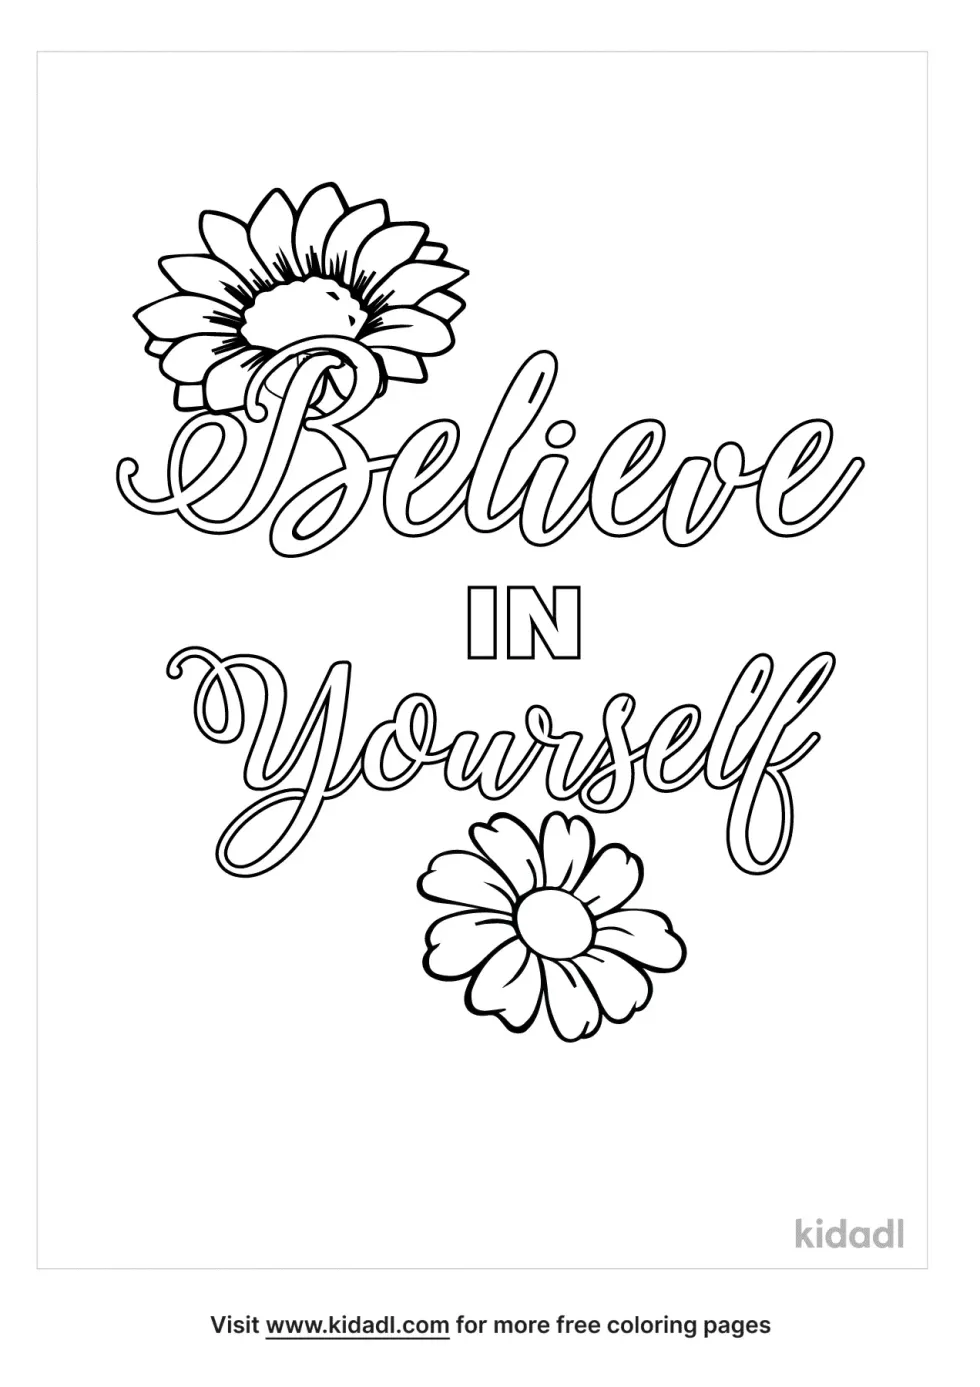 Believe In Yourself Quote